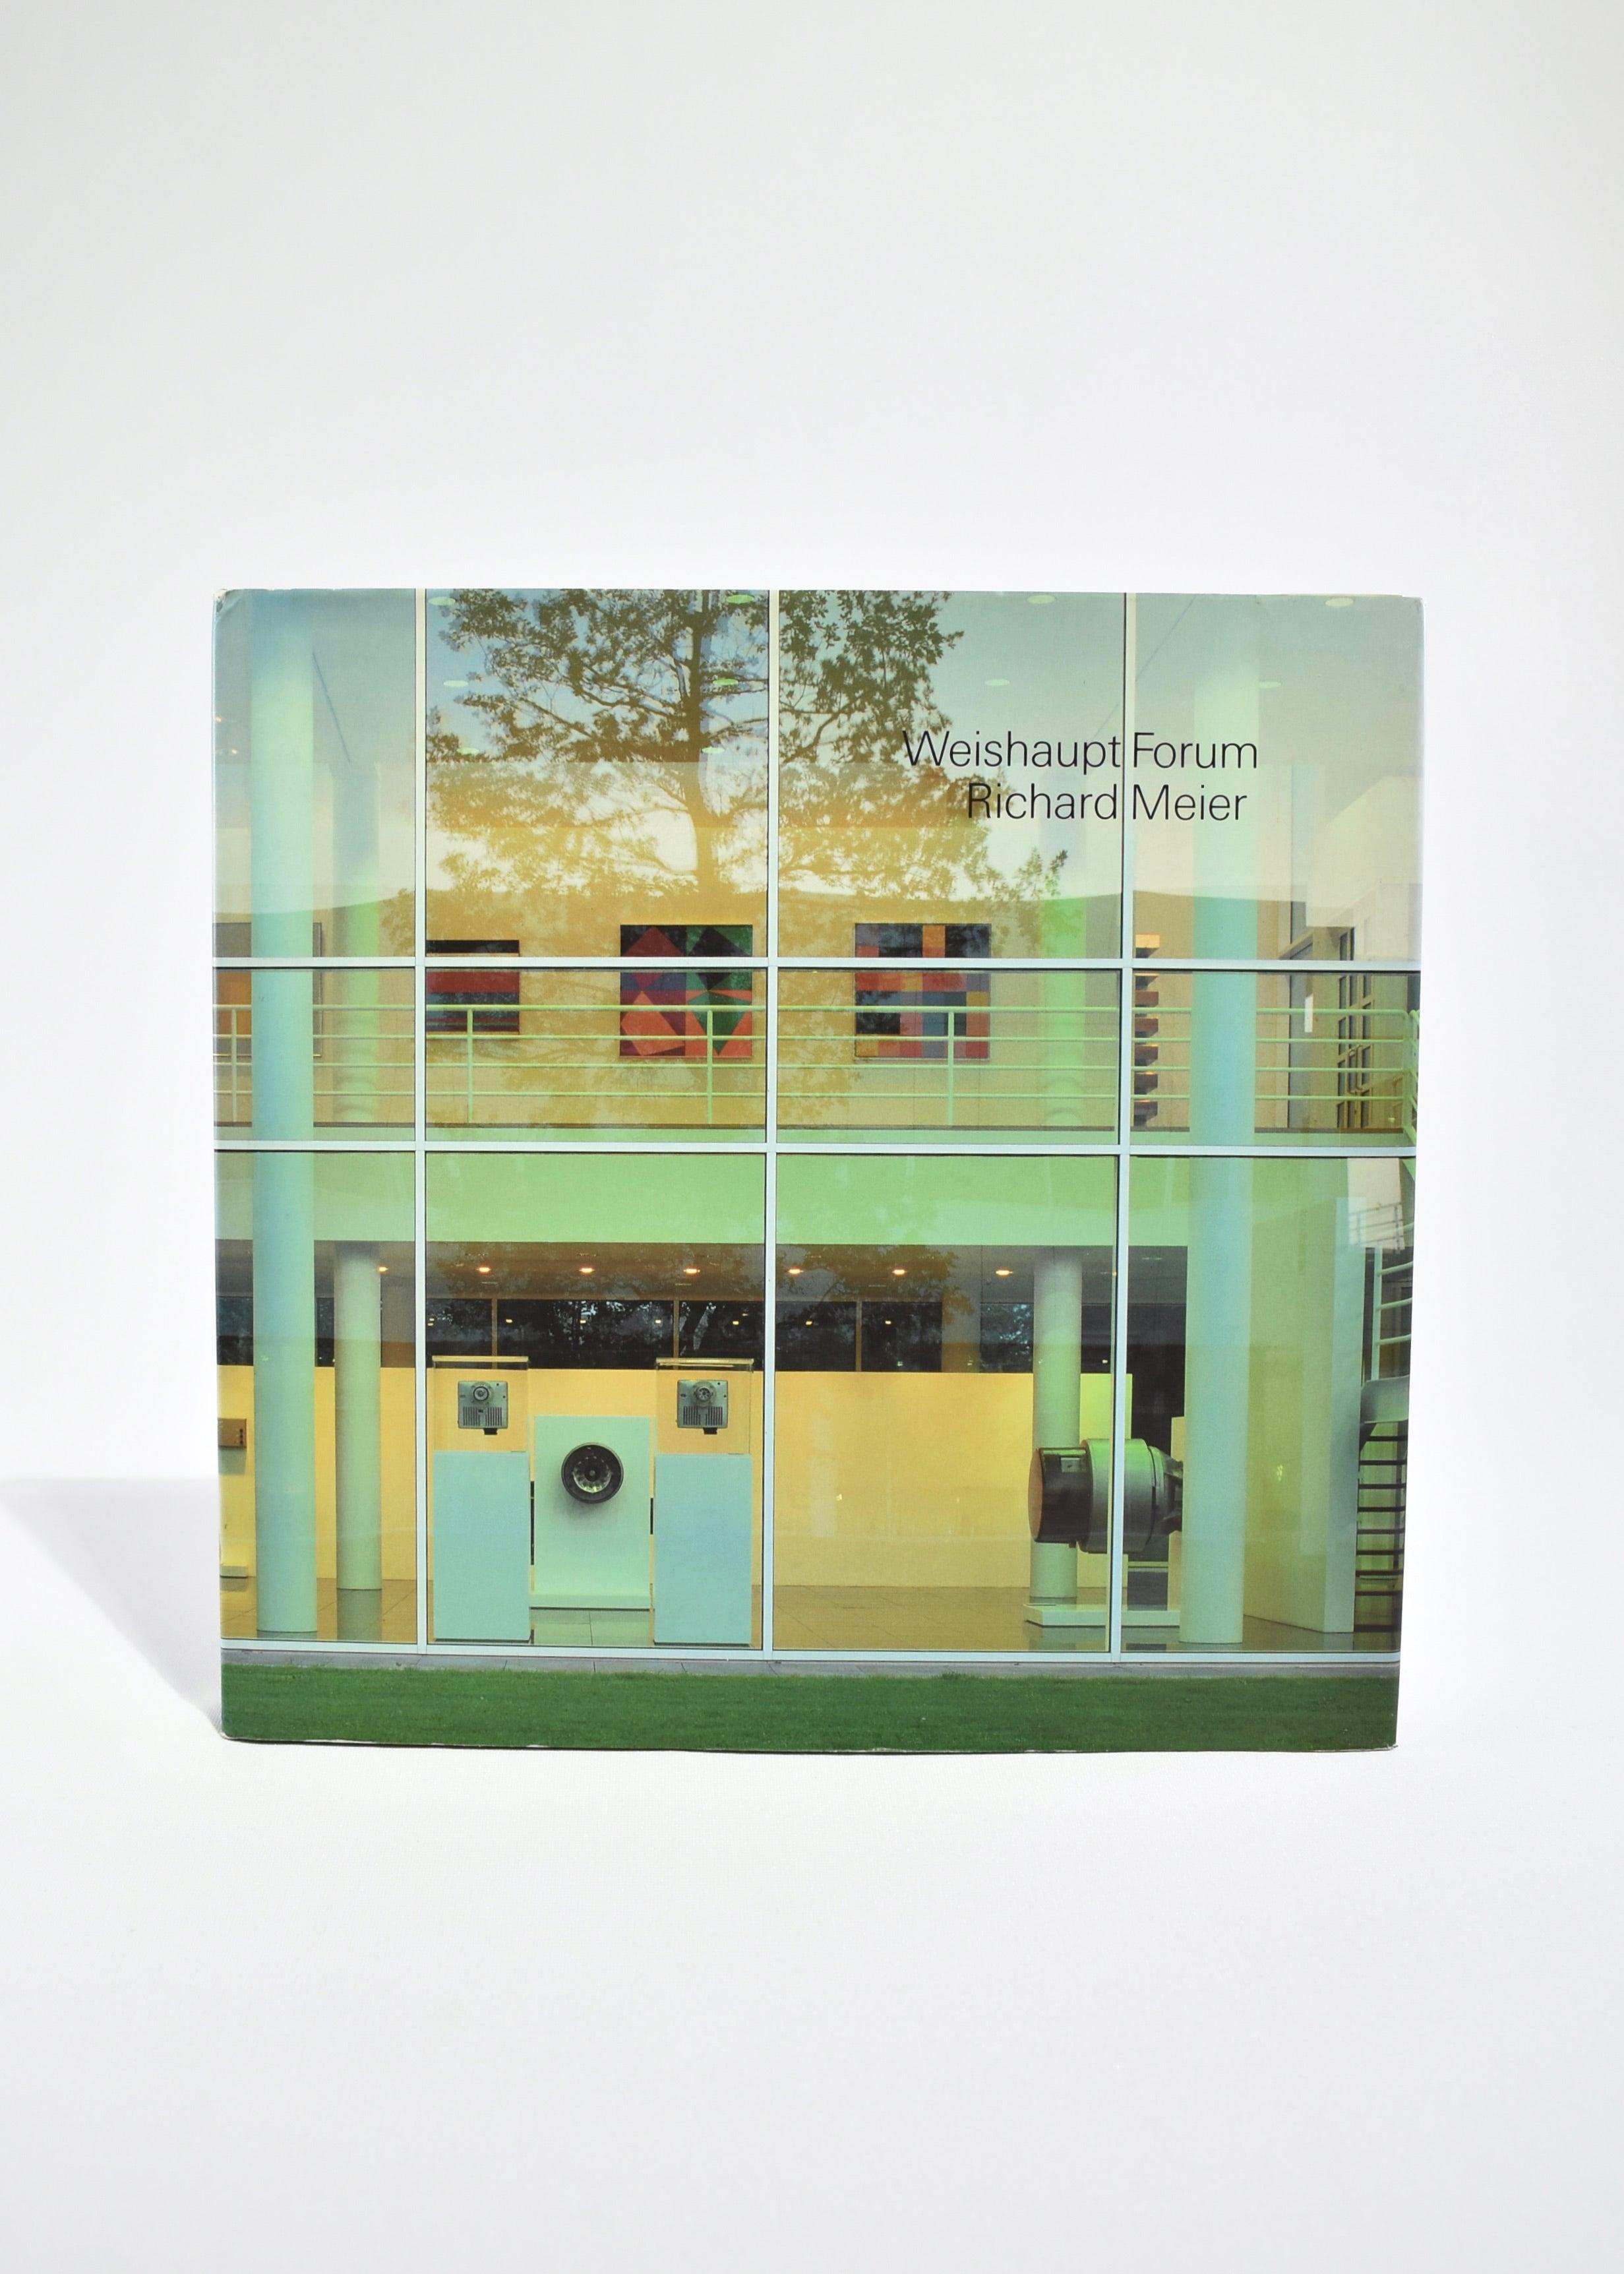 Vintage hardback coffee table book featuring the Weishaupt project designed by Richard Meier. By Werner Blaser, published in 1993. 1st edition, 95 pages.

